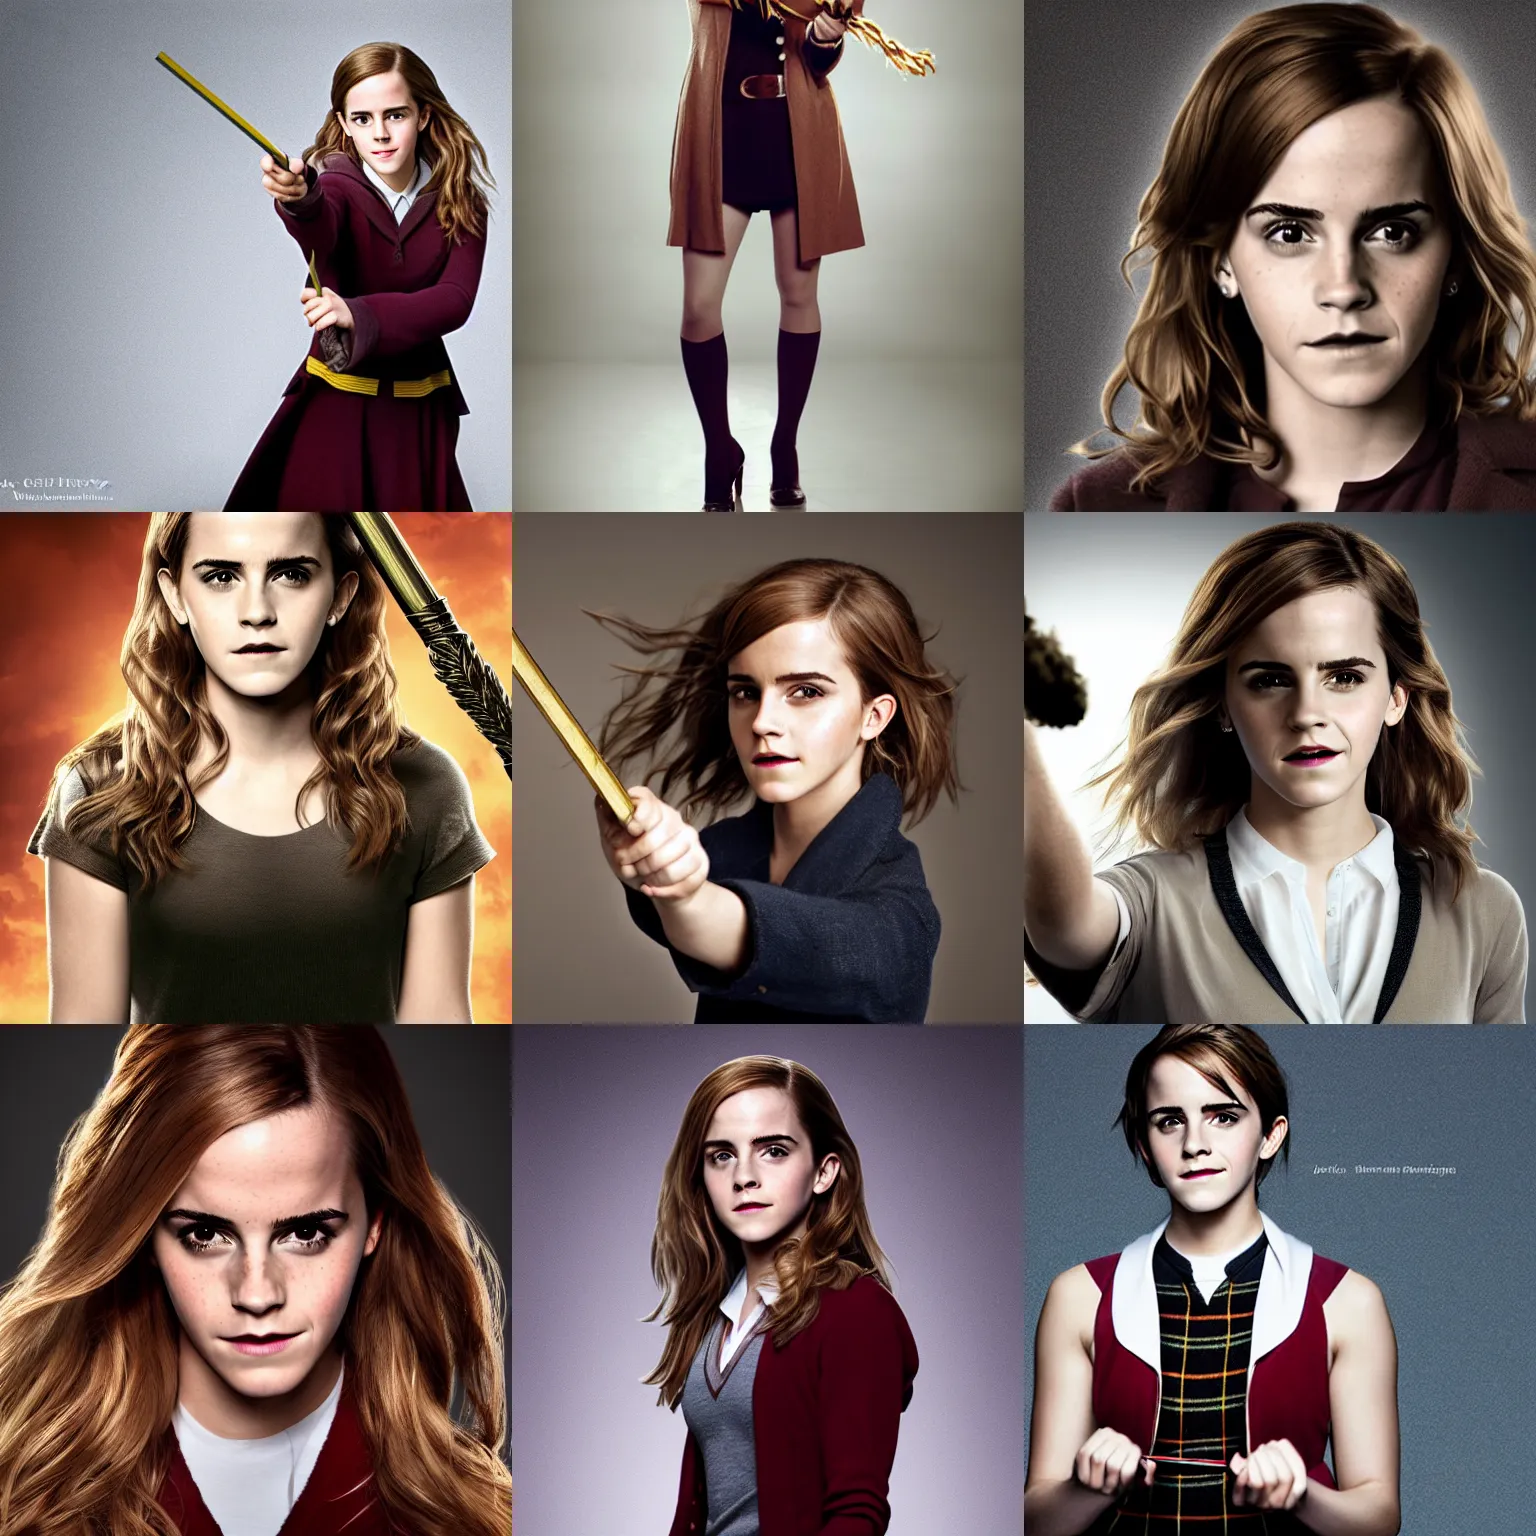 Prompt: Emma Watson as Hermione Granger, promotional photo, studio lighting, blank background, posing with wand